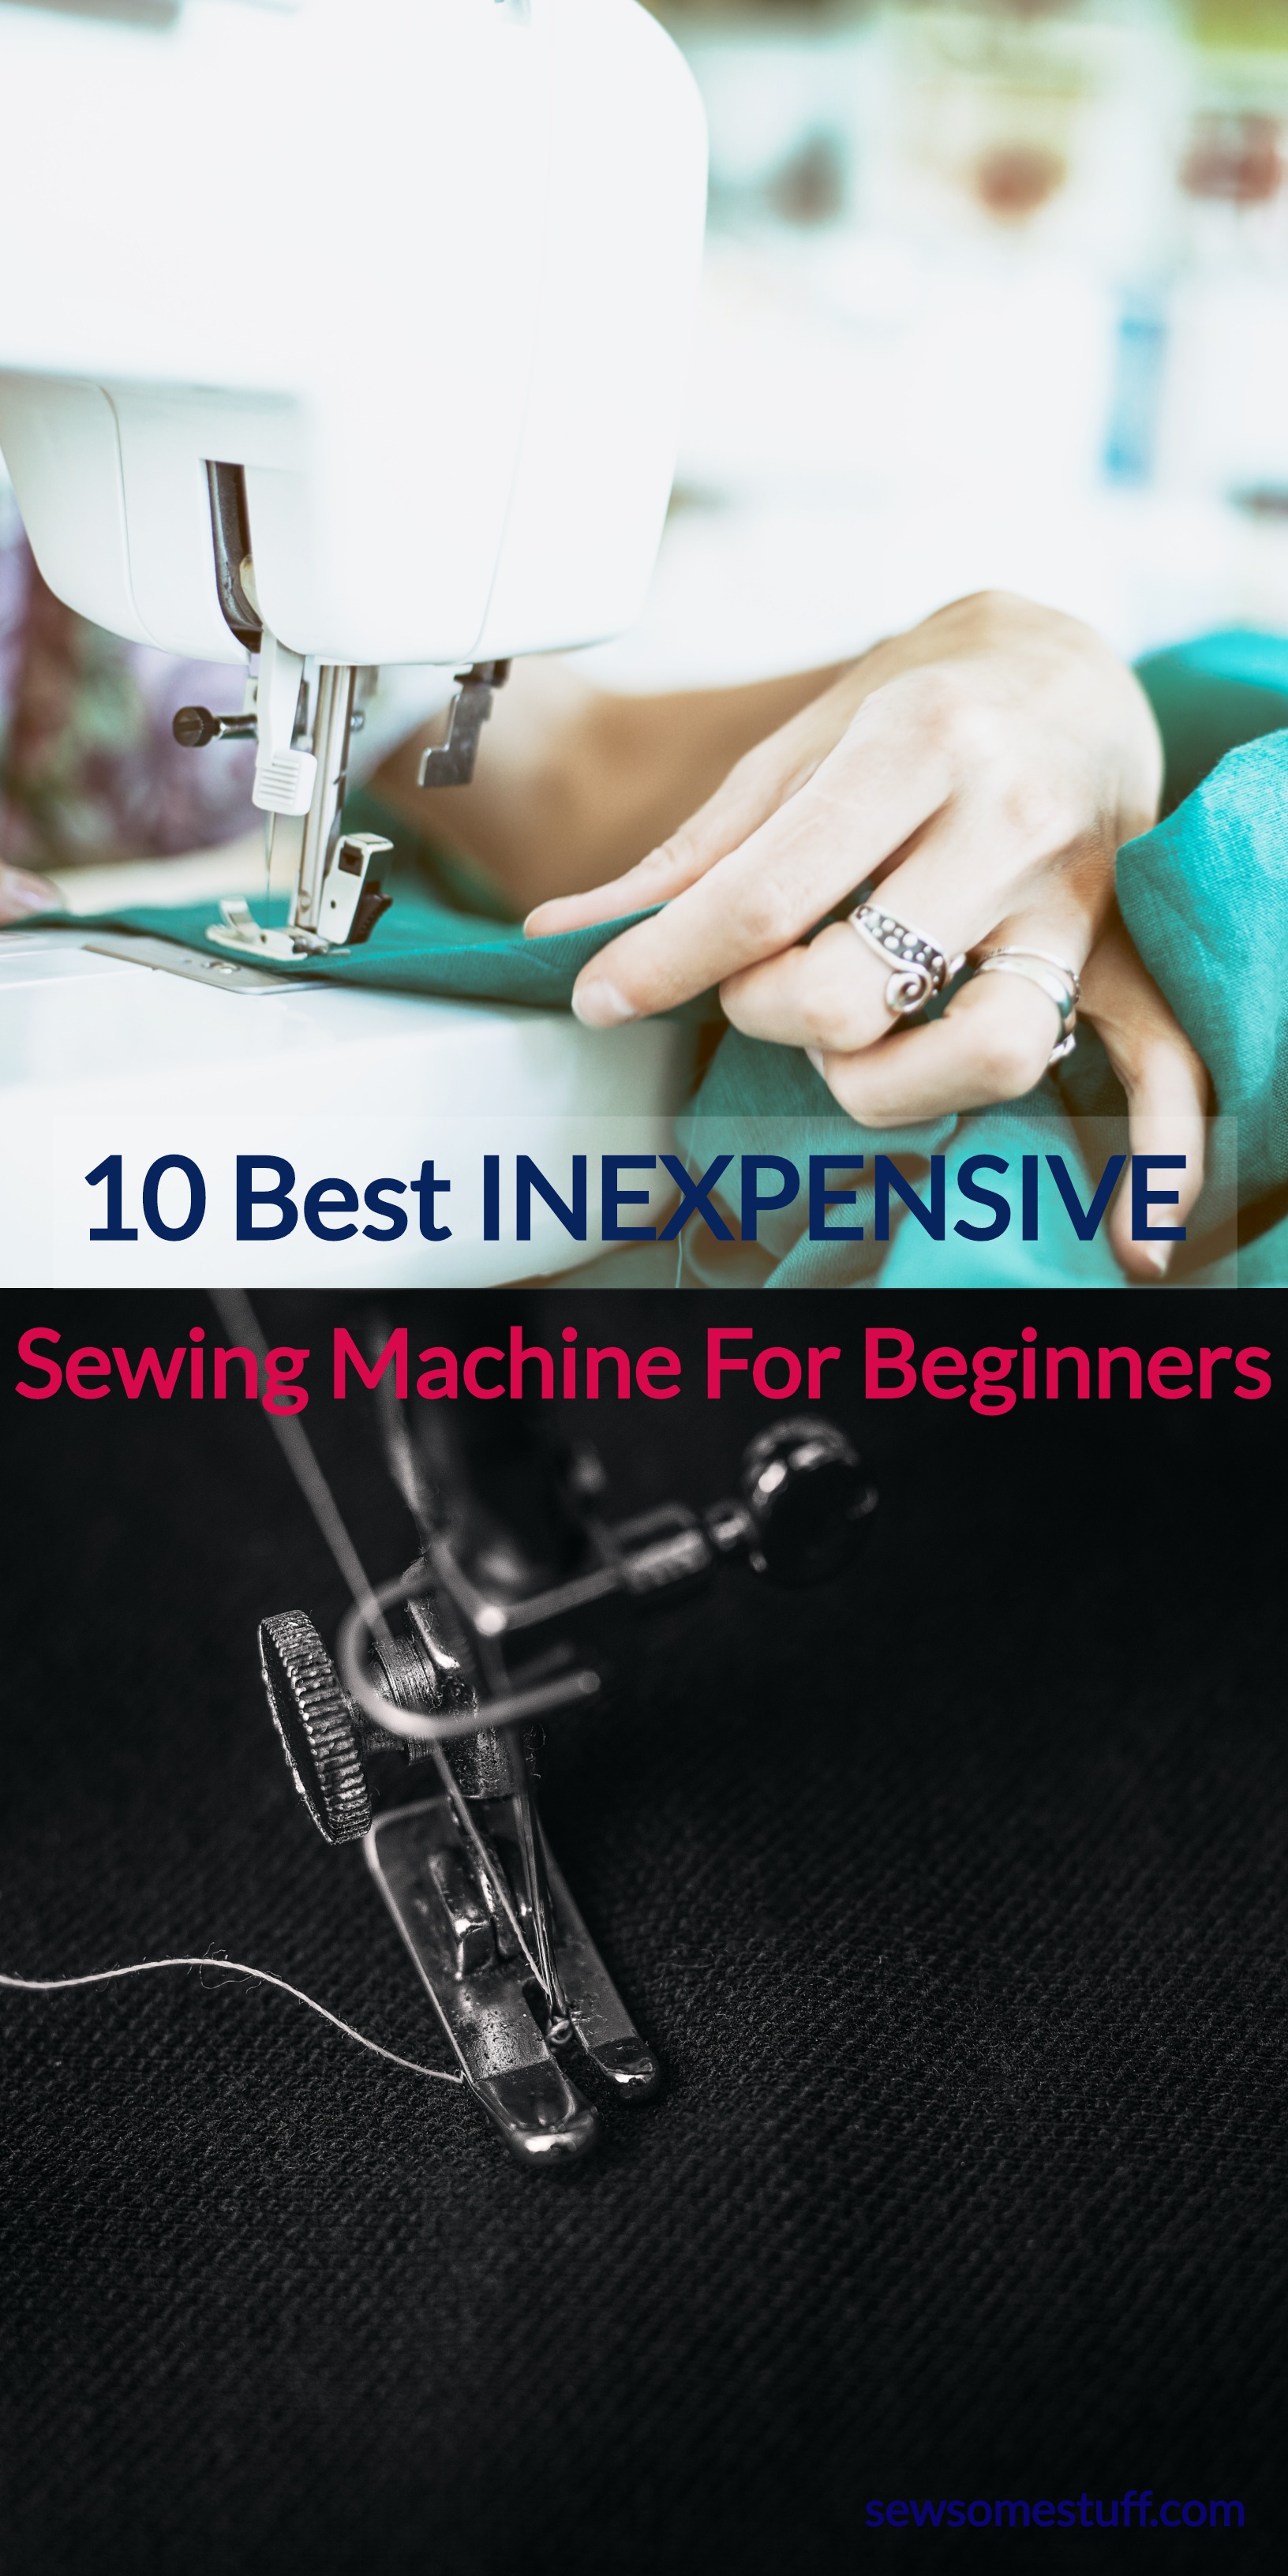 Check out these best sewing machines for beginners! inexpensive sewing machines for beginners, best sewing machine 2019, best sewing machine for the money, sewing machine for beginners Walmart, brother cs6000i sewing machine, best sewing machine, best sewing machines for making clothes, best sewing machines for seamstress, best sewing machines for quilting #sewing #diy